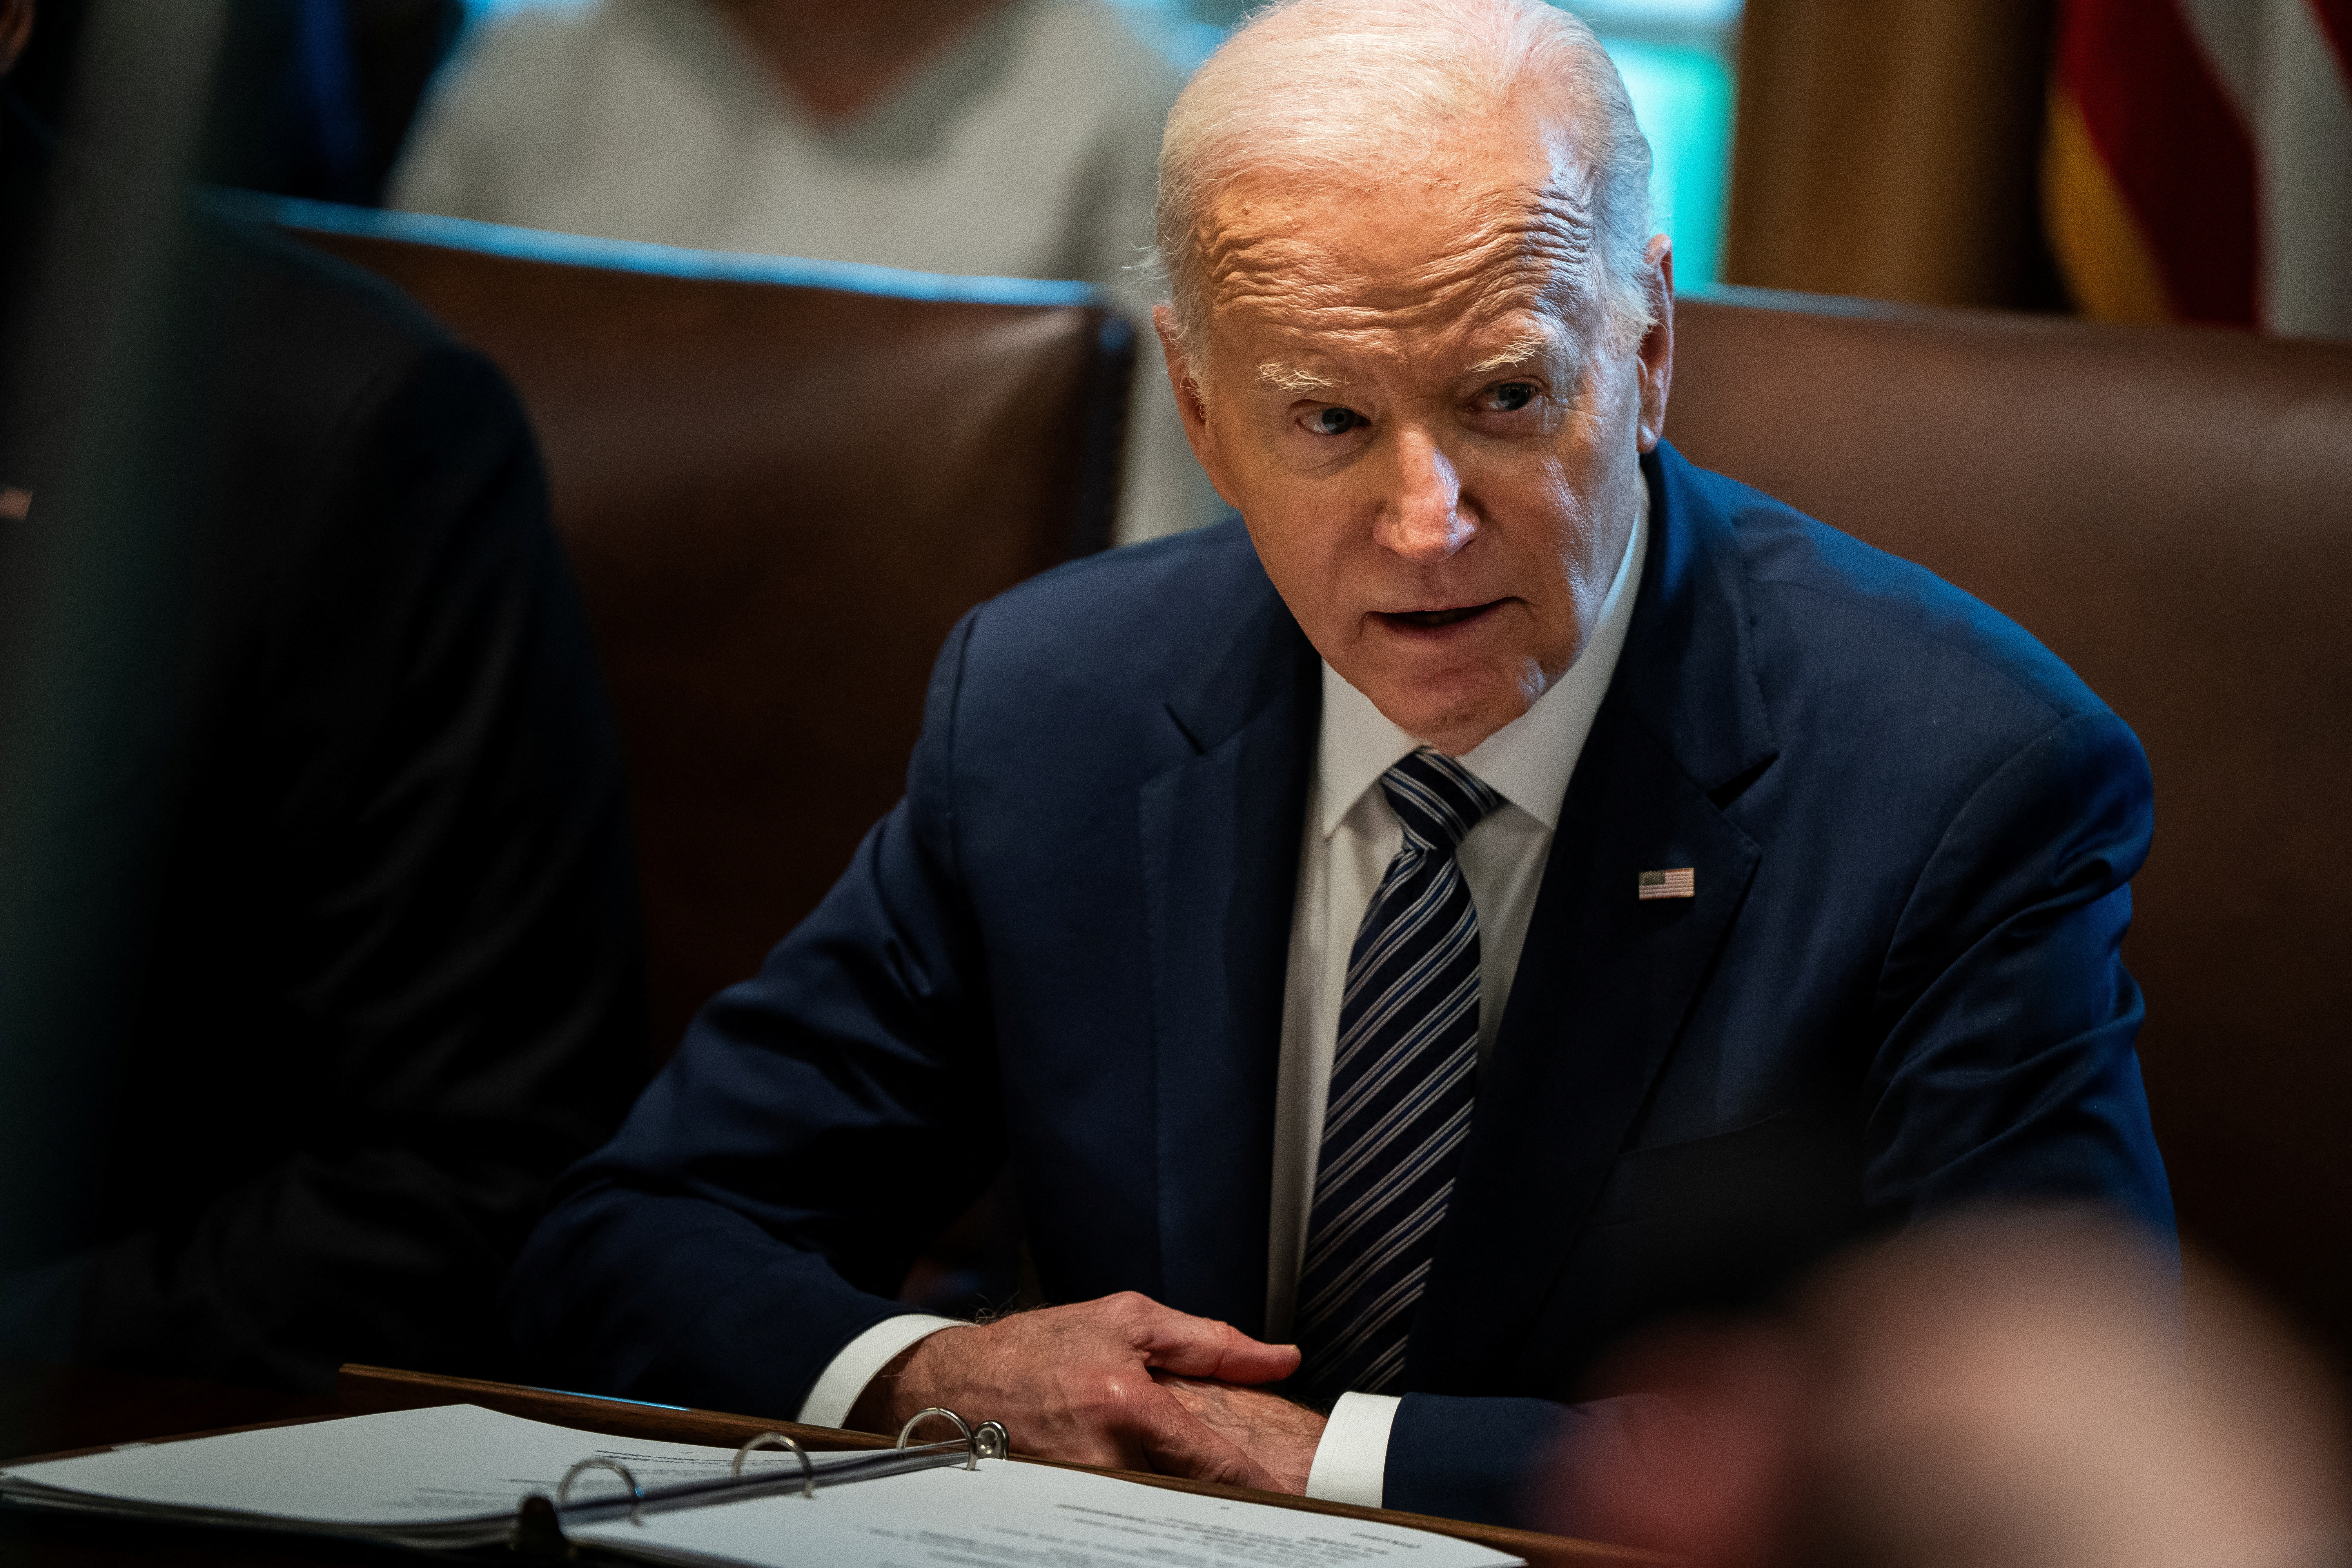 U.S. President Joe Biden holds a meeting with the Joint Chiefs of Staff and Combatant Commanders in Washington